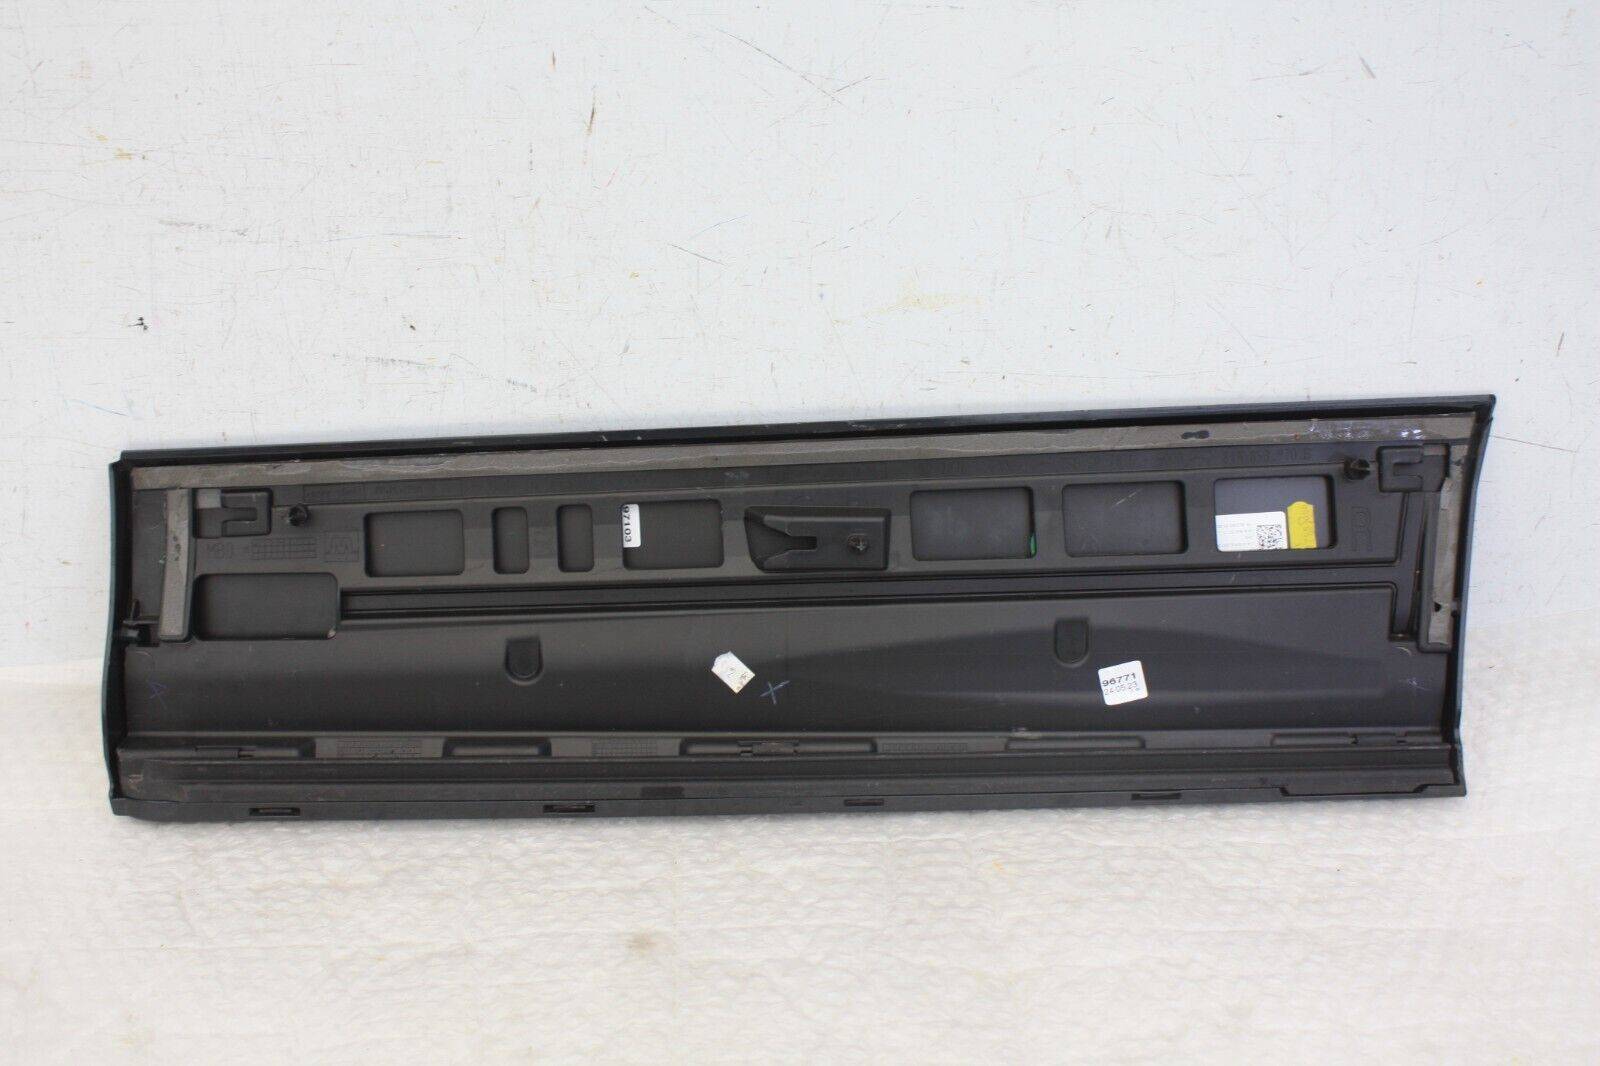 Audi-Q2-Rear-Right-Door-Moulding-2016-TO-2021-81A853970B-Genuine-176362662914-7